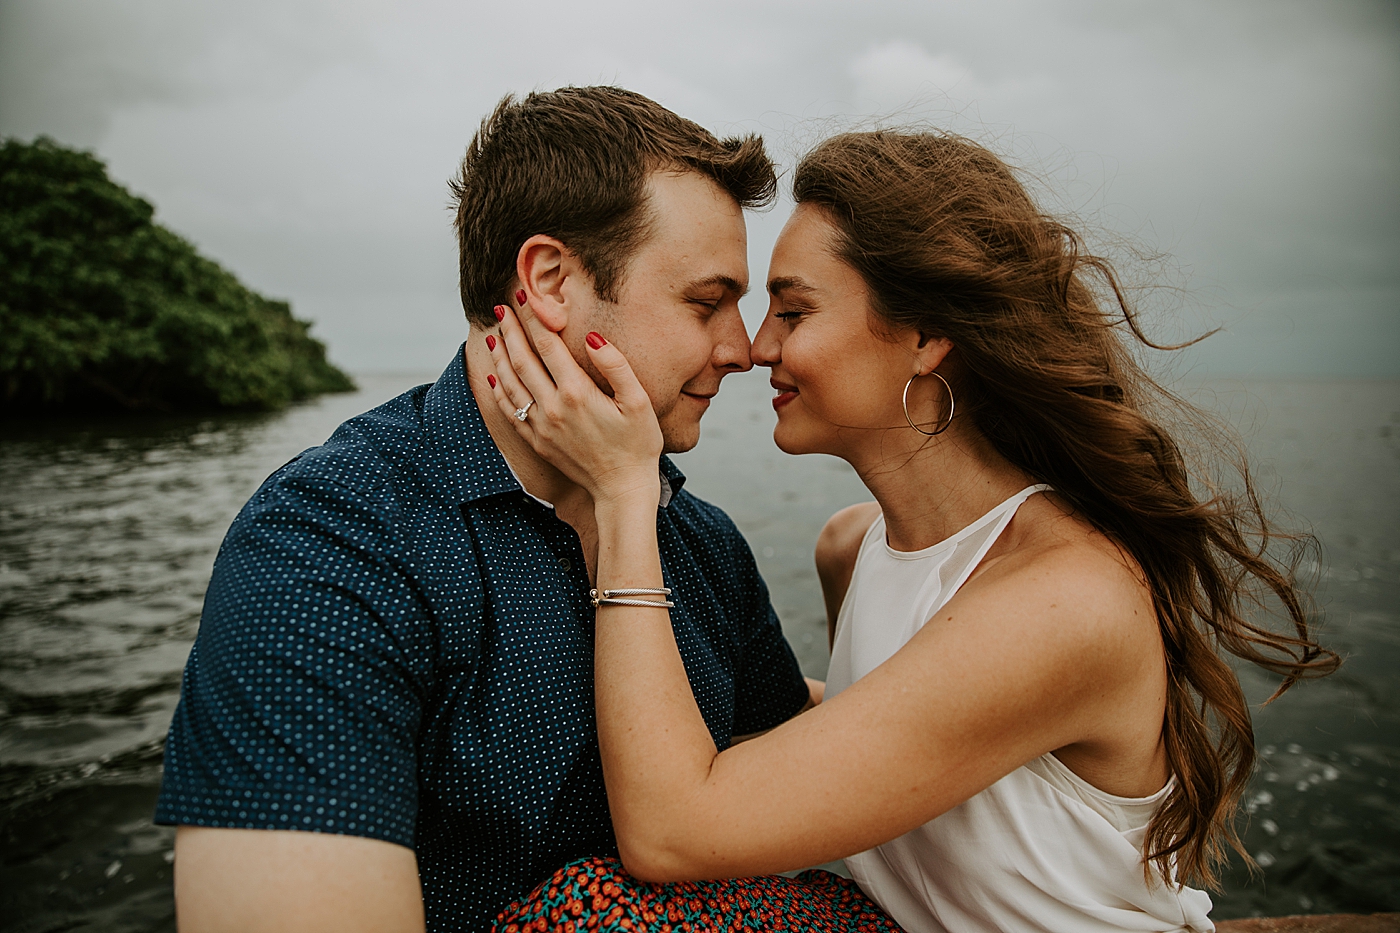 Lady holding man's face with calm lake behind them Deering Estate Engagement Photography captured by Maggie Alvarez Photography